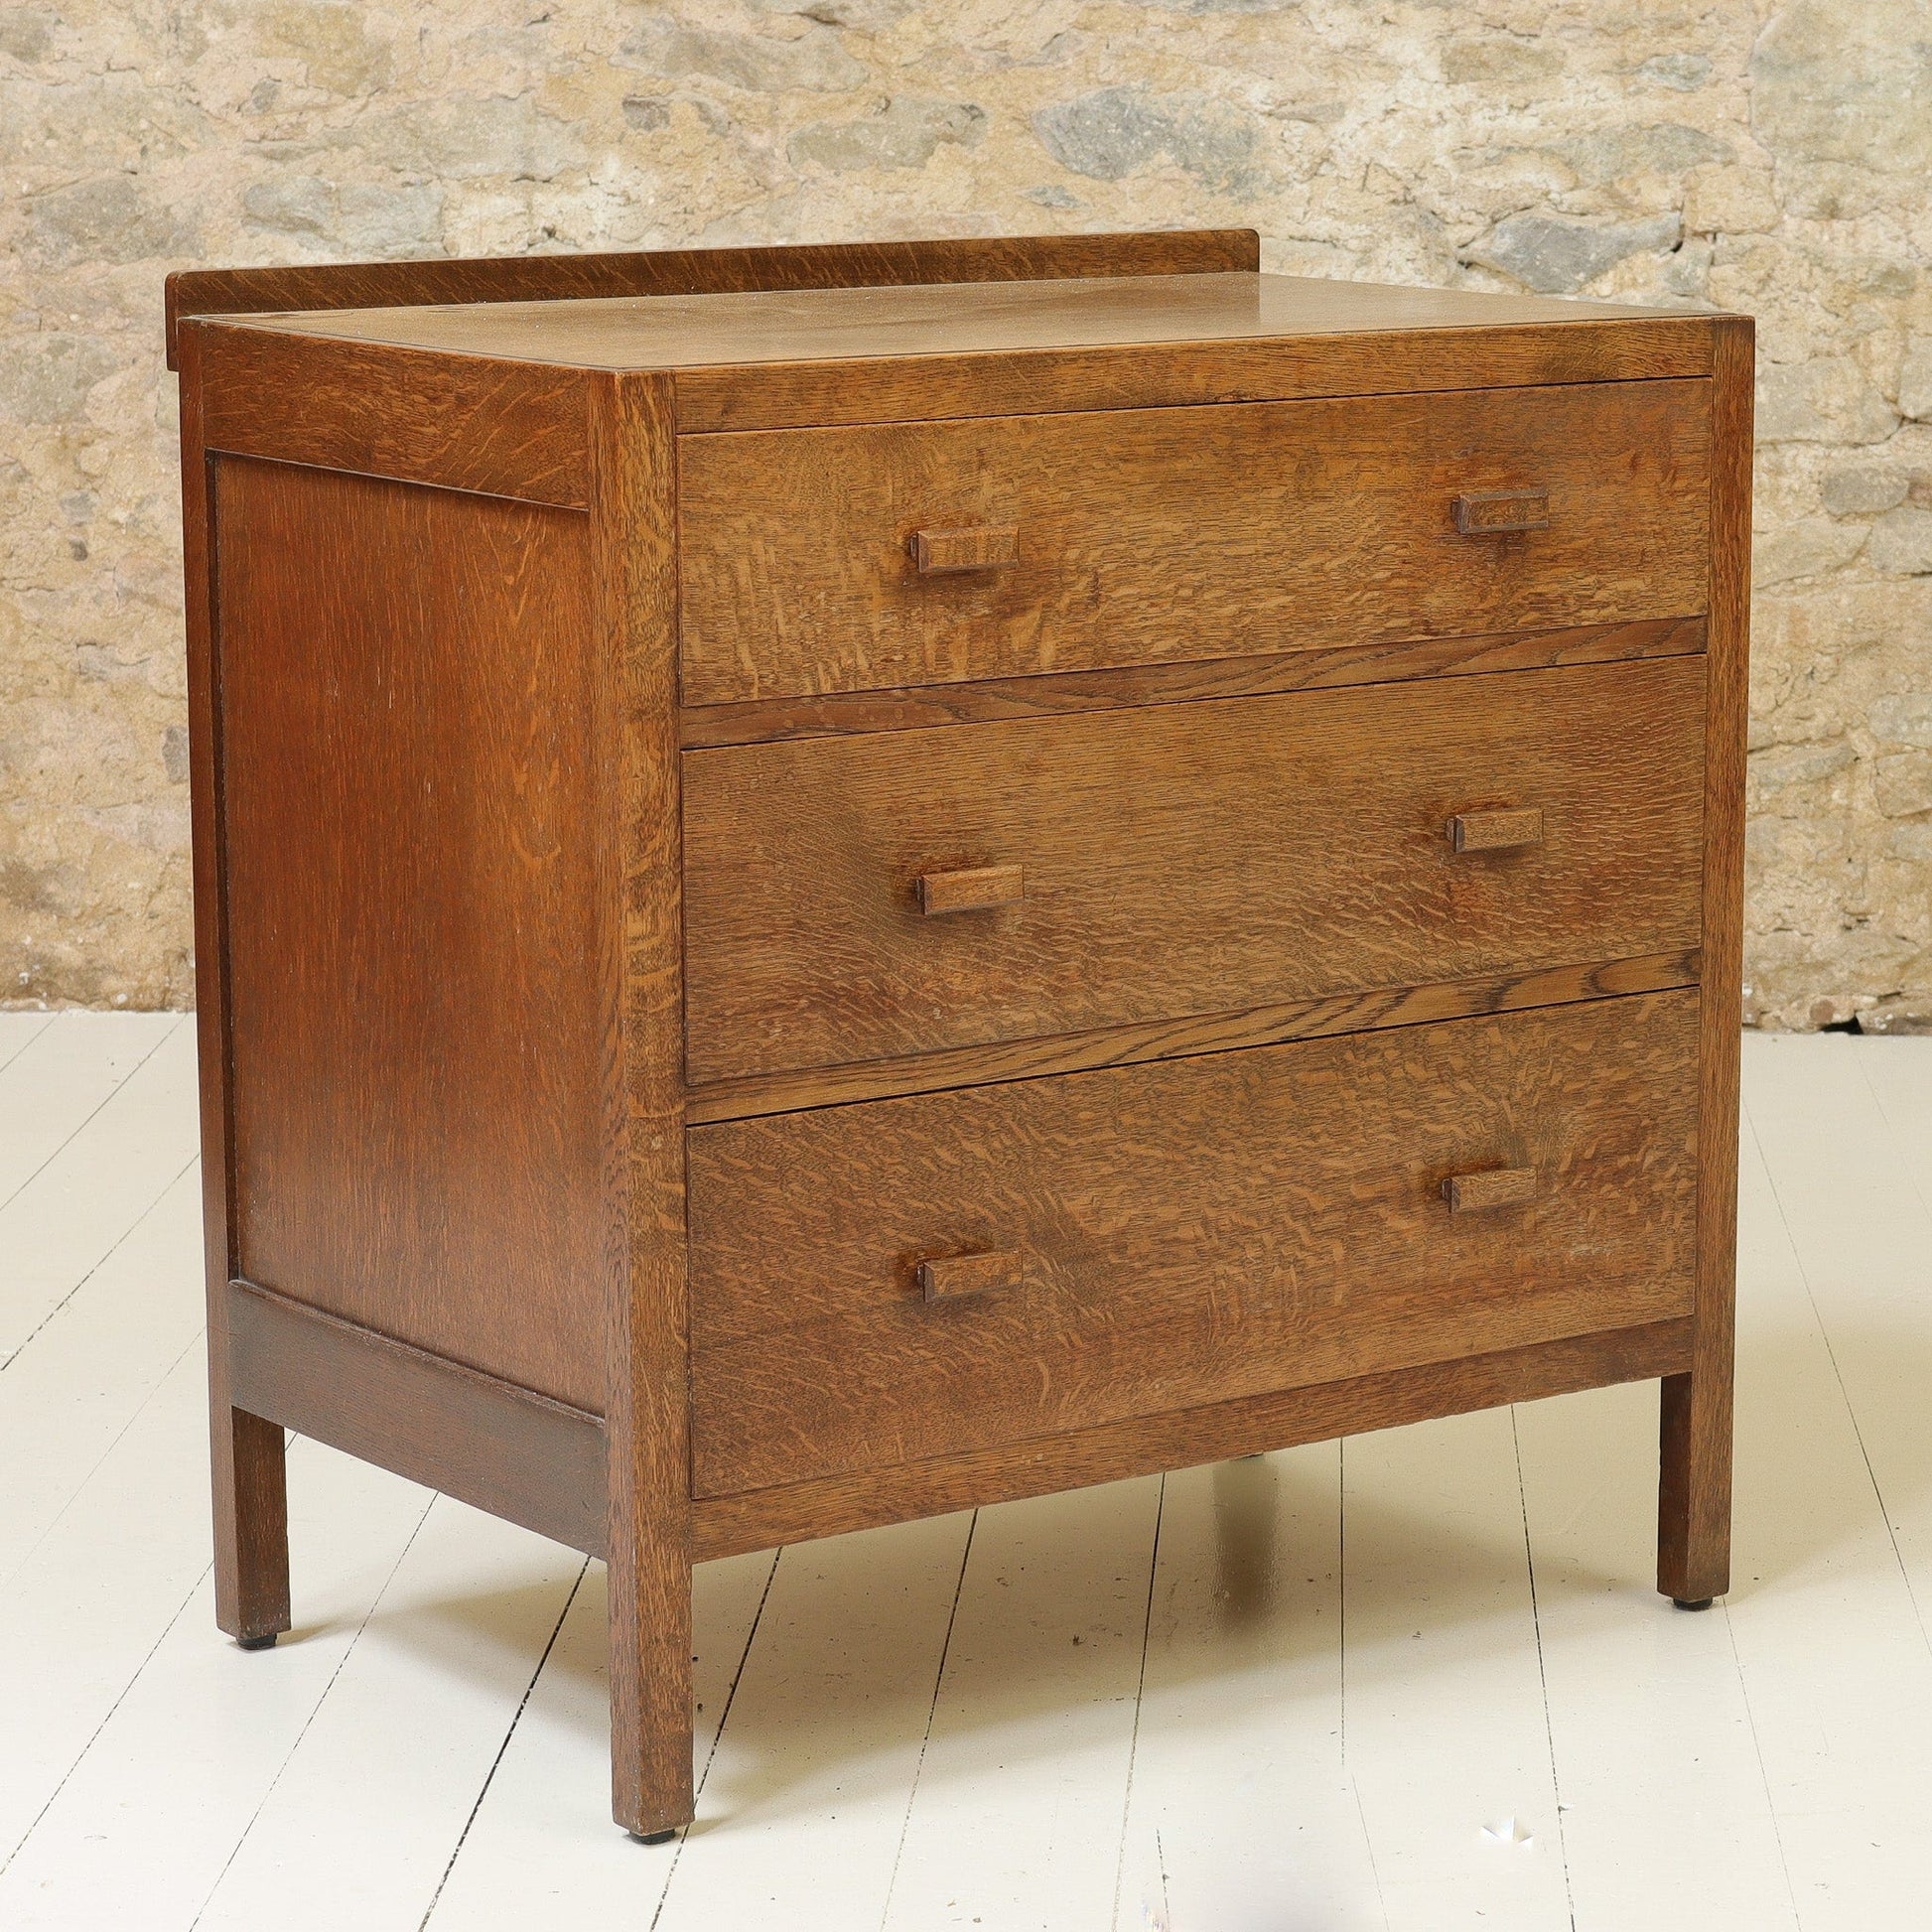 Heal and Co Arts & Crafts Cotswold School Oak Chest of Drawers